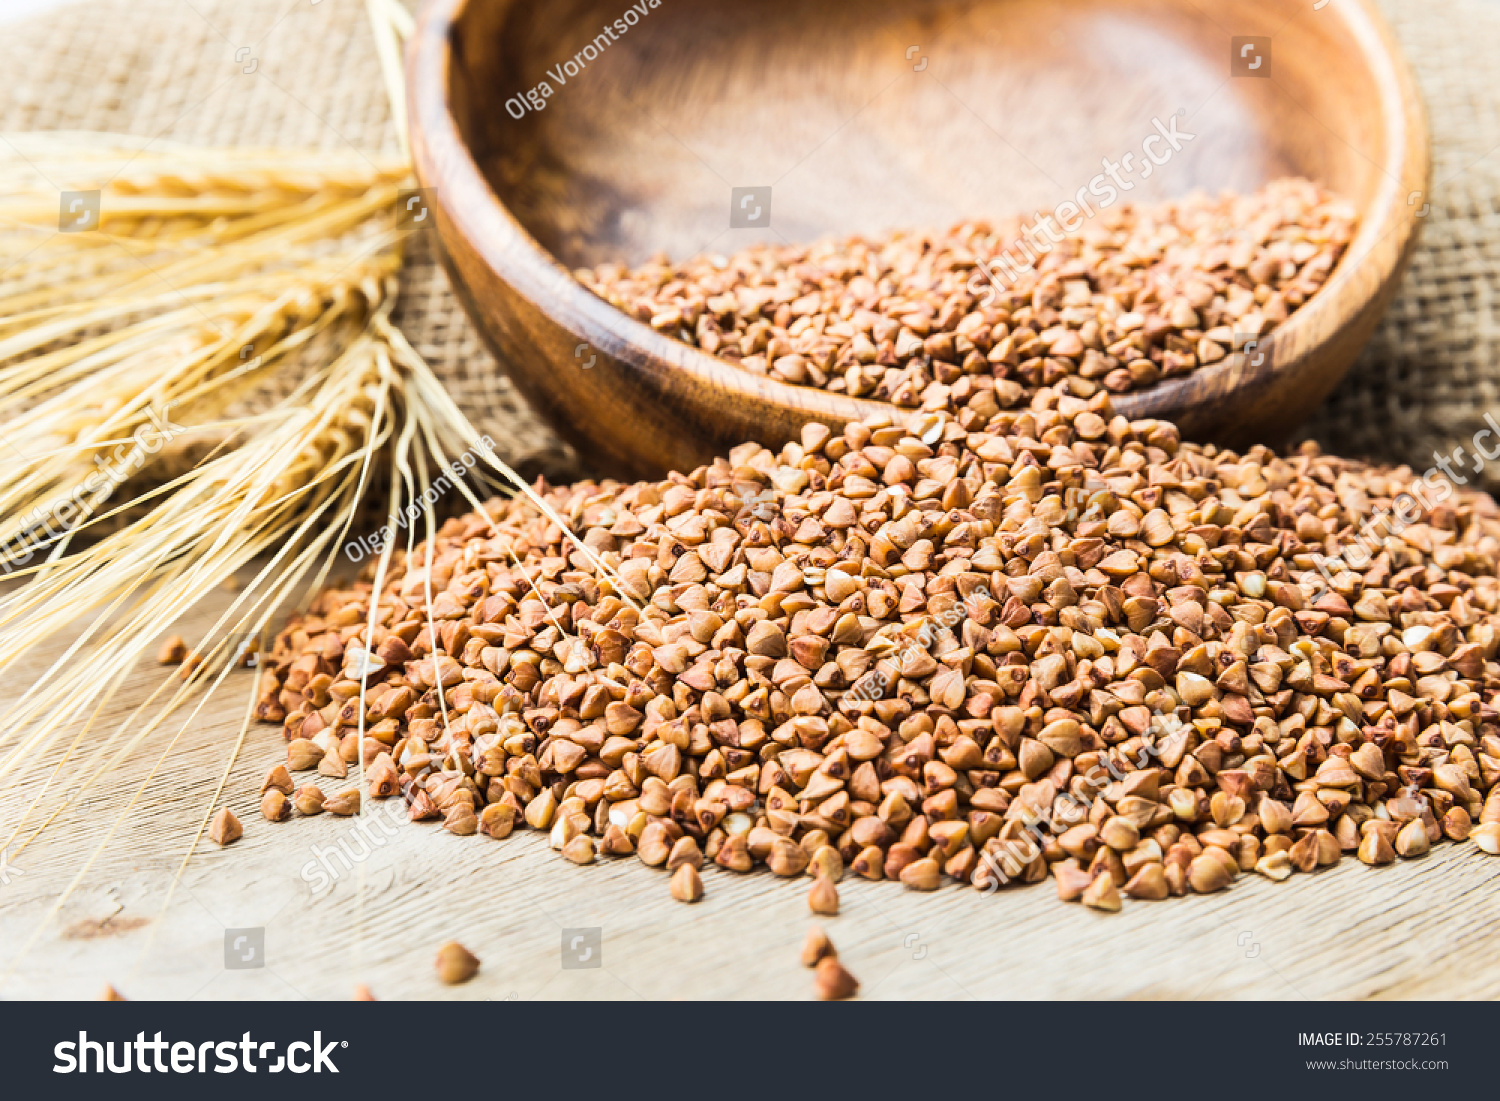 Bowl with Buckwheat on a wooden background #255787261